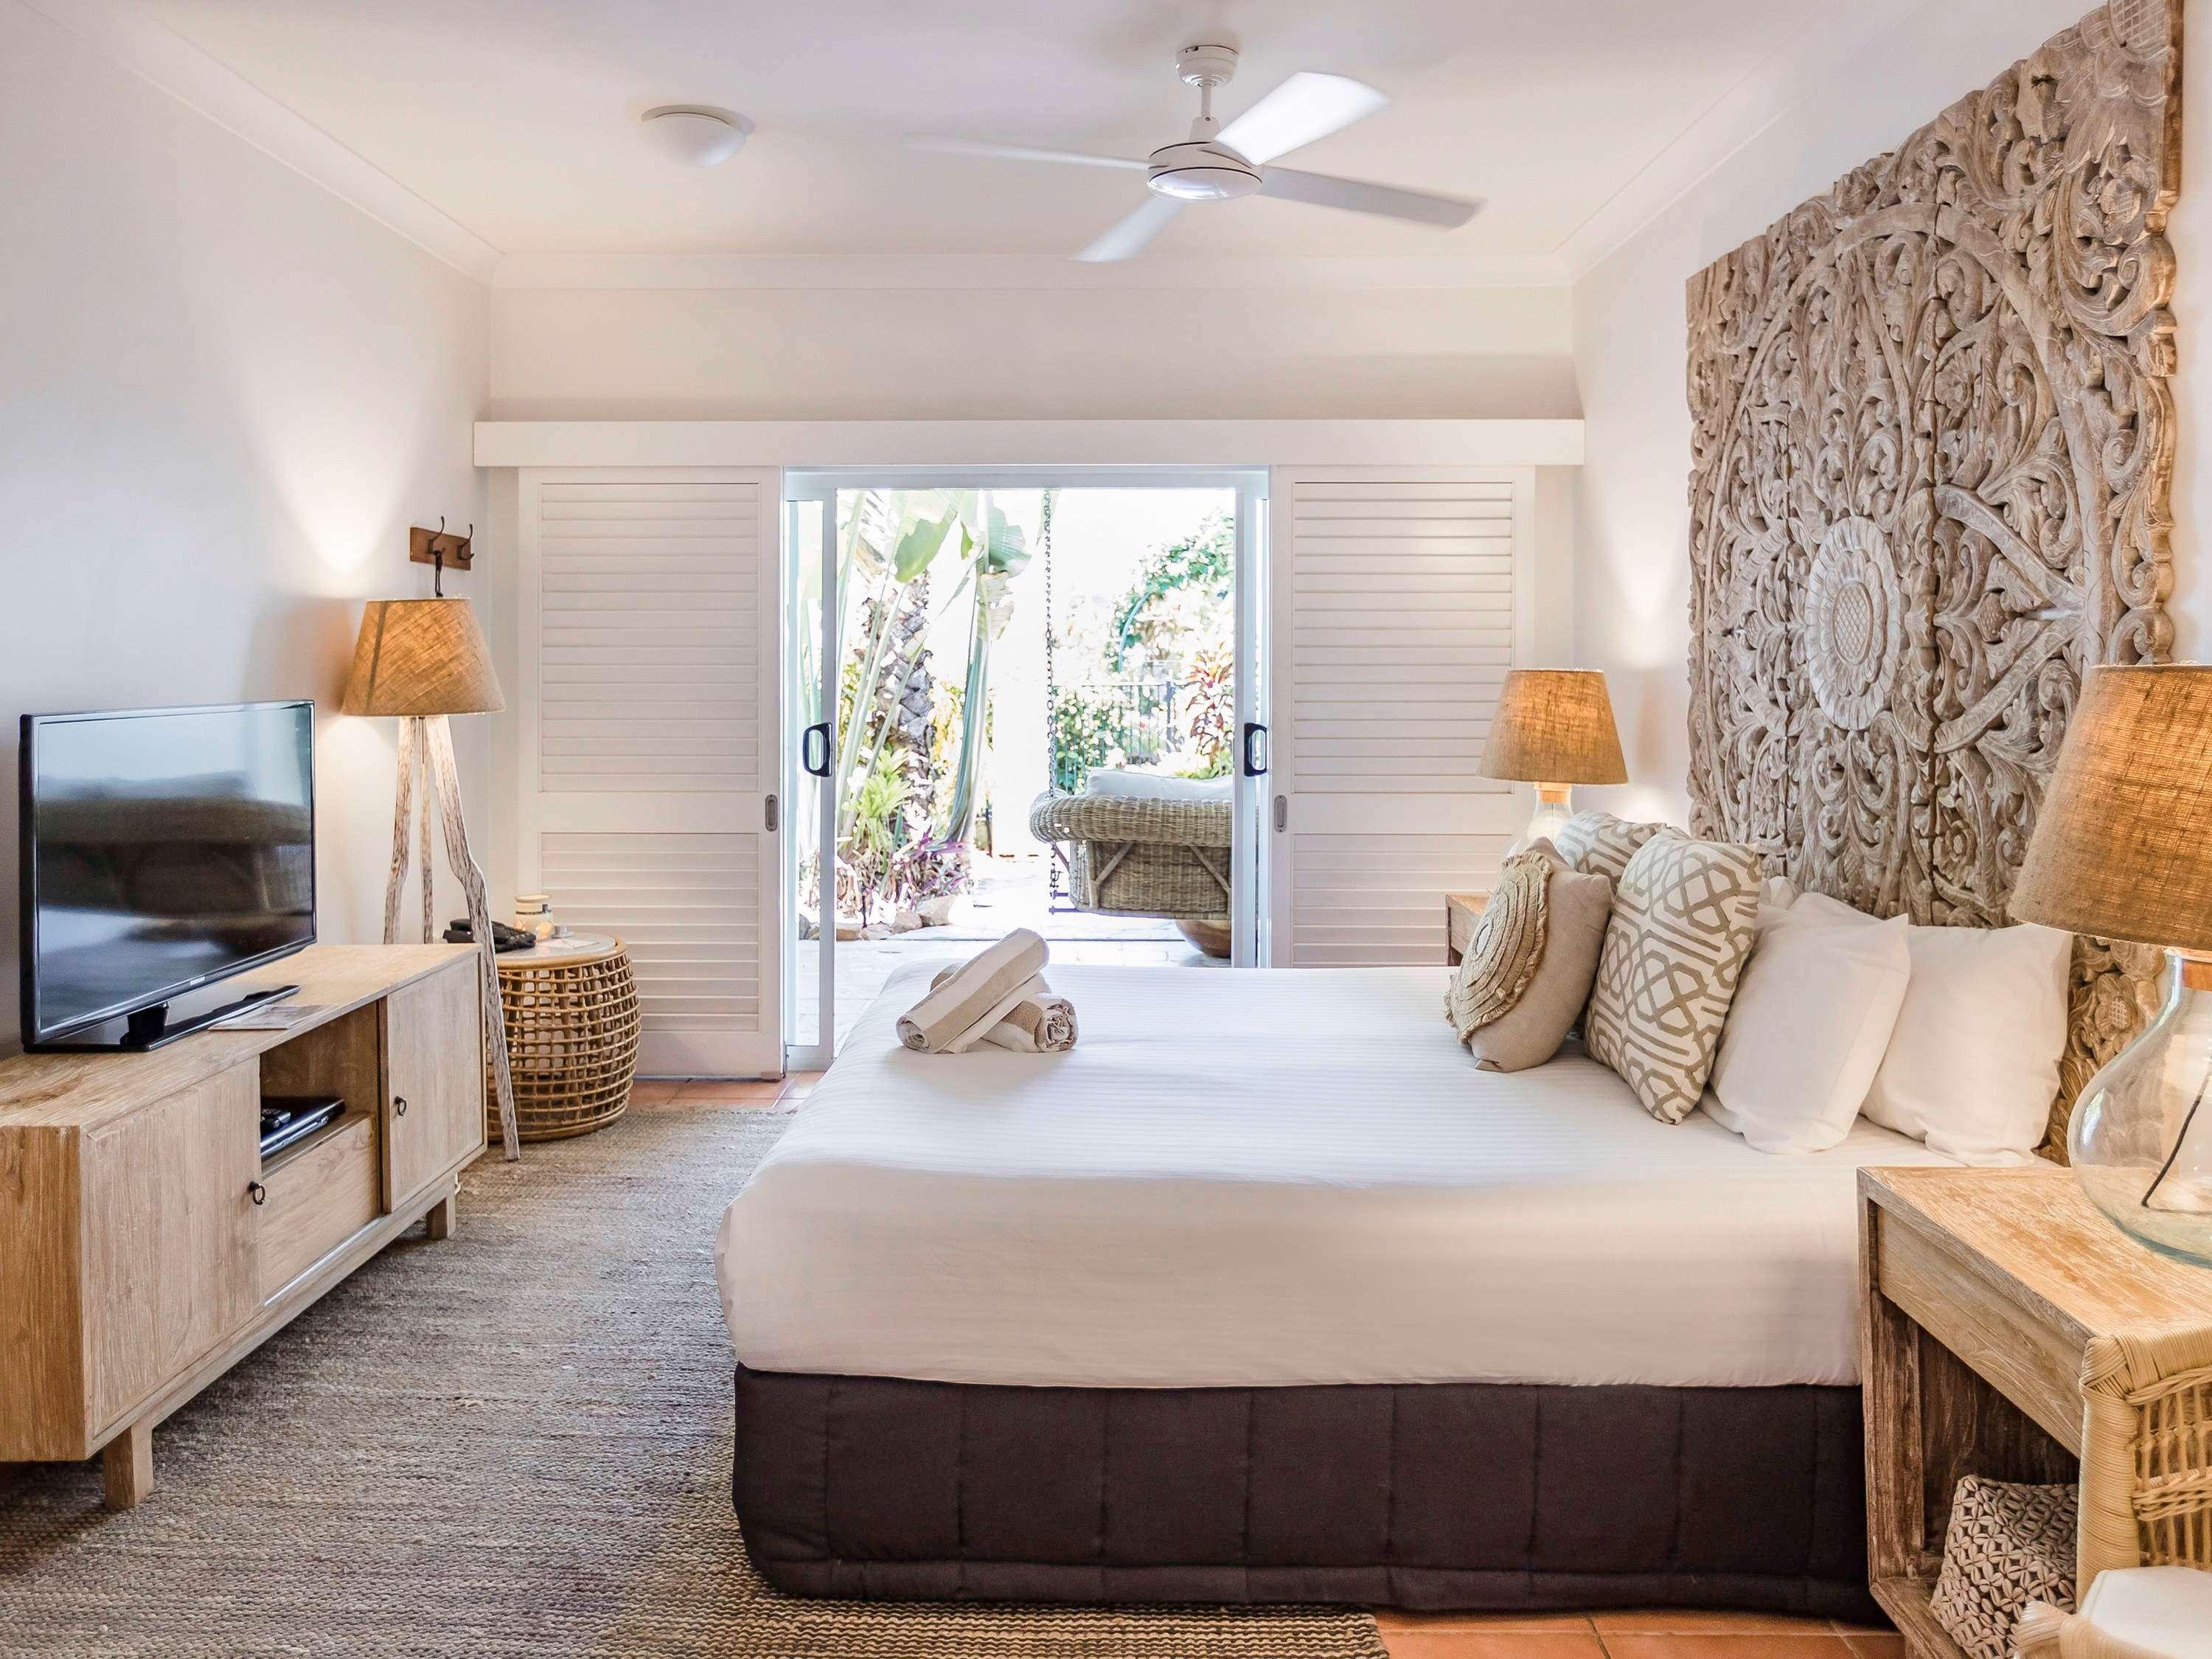 The Reef House Boutique Hotel & Spa - Adults Only Tropical Escapes Palm Cove Bagian luar foto